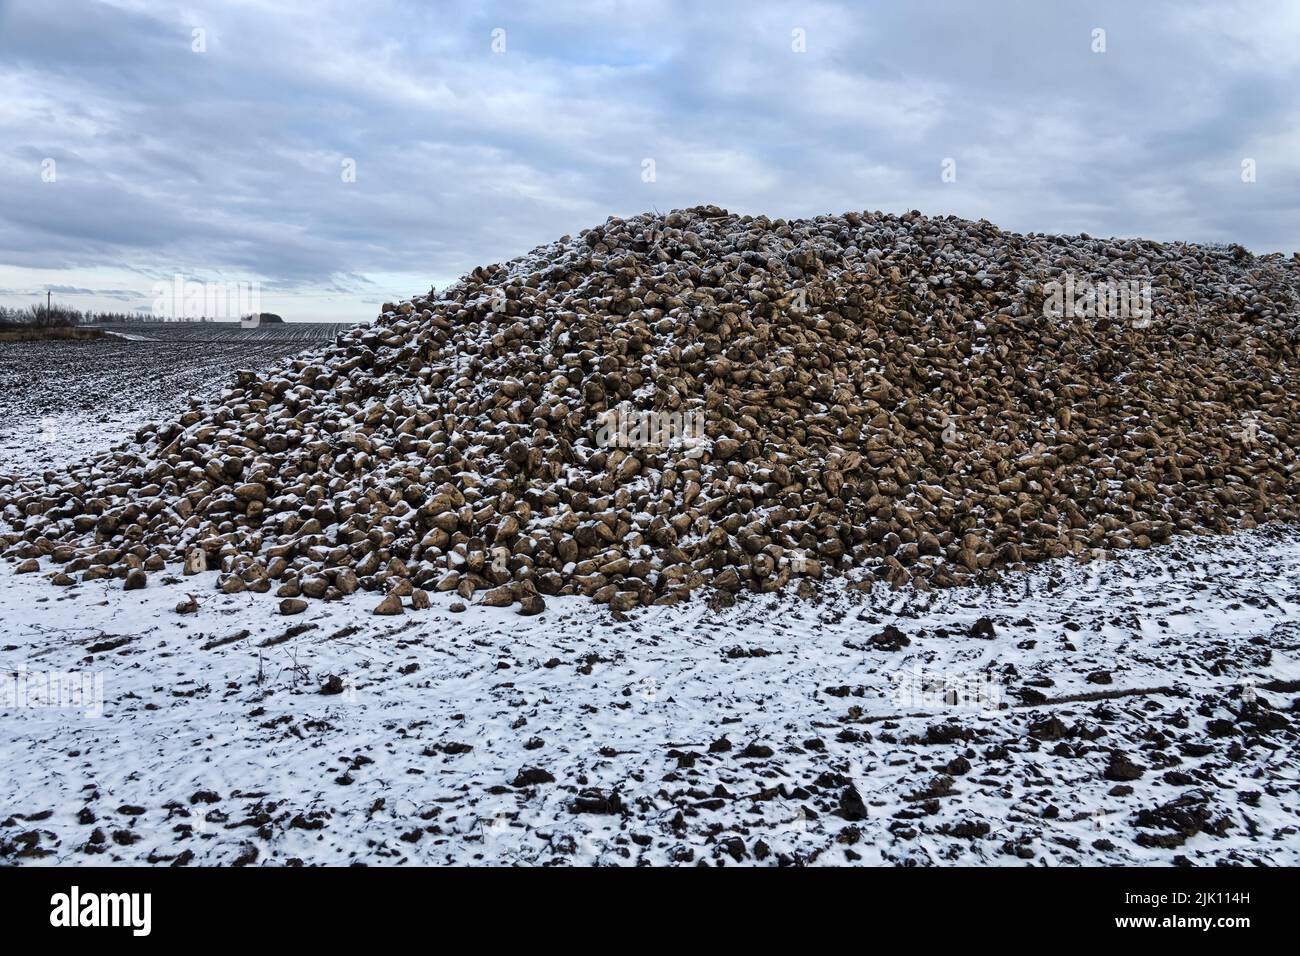 Sugar-beet growing, olericulture. Root crop are harvested before frosts and collected in storage bunch (outdoor bank), Storage is intermediate befor s Stock Photo